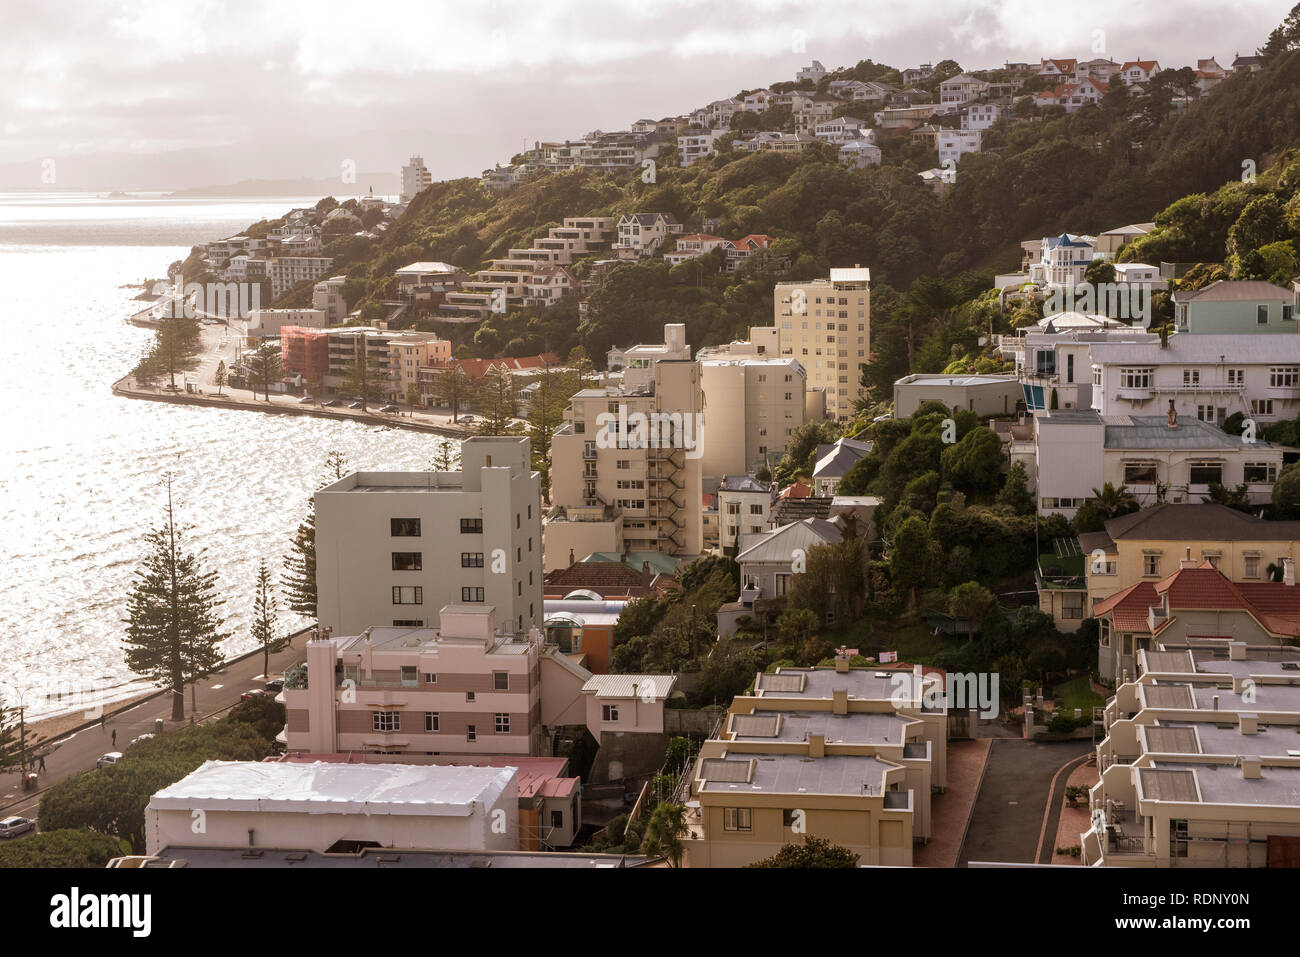 View of the Mount Victoria neighborhood in Wellington on the North Island of New Zealand. Stock Photo